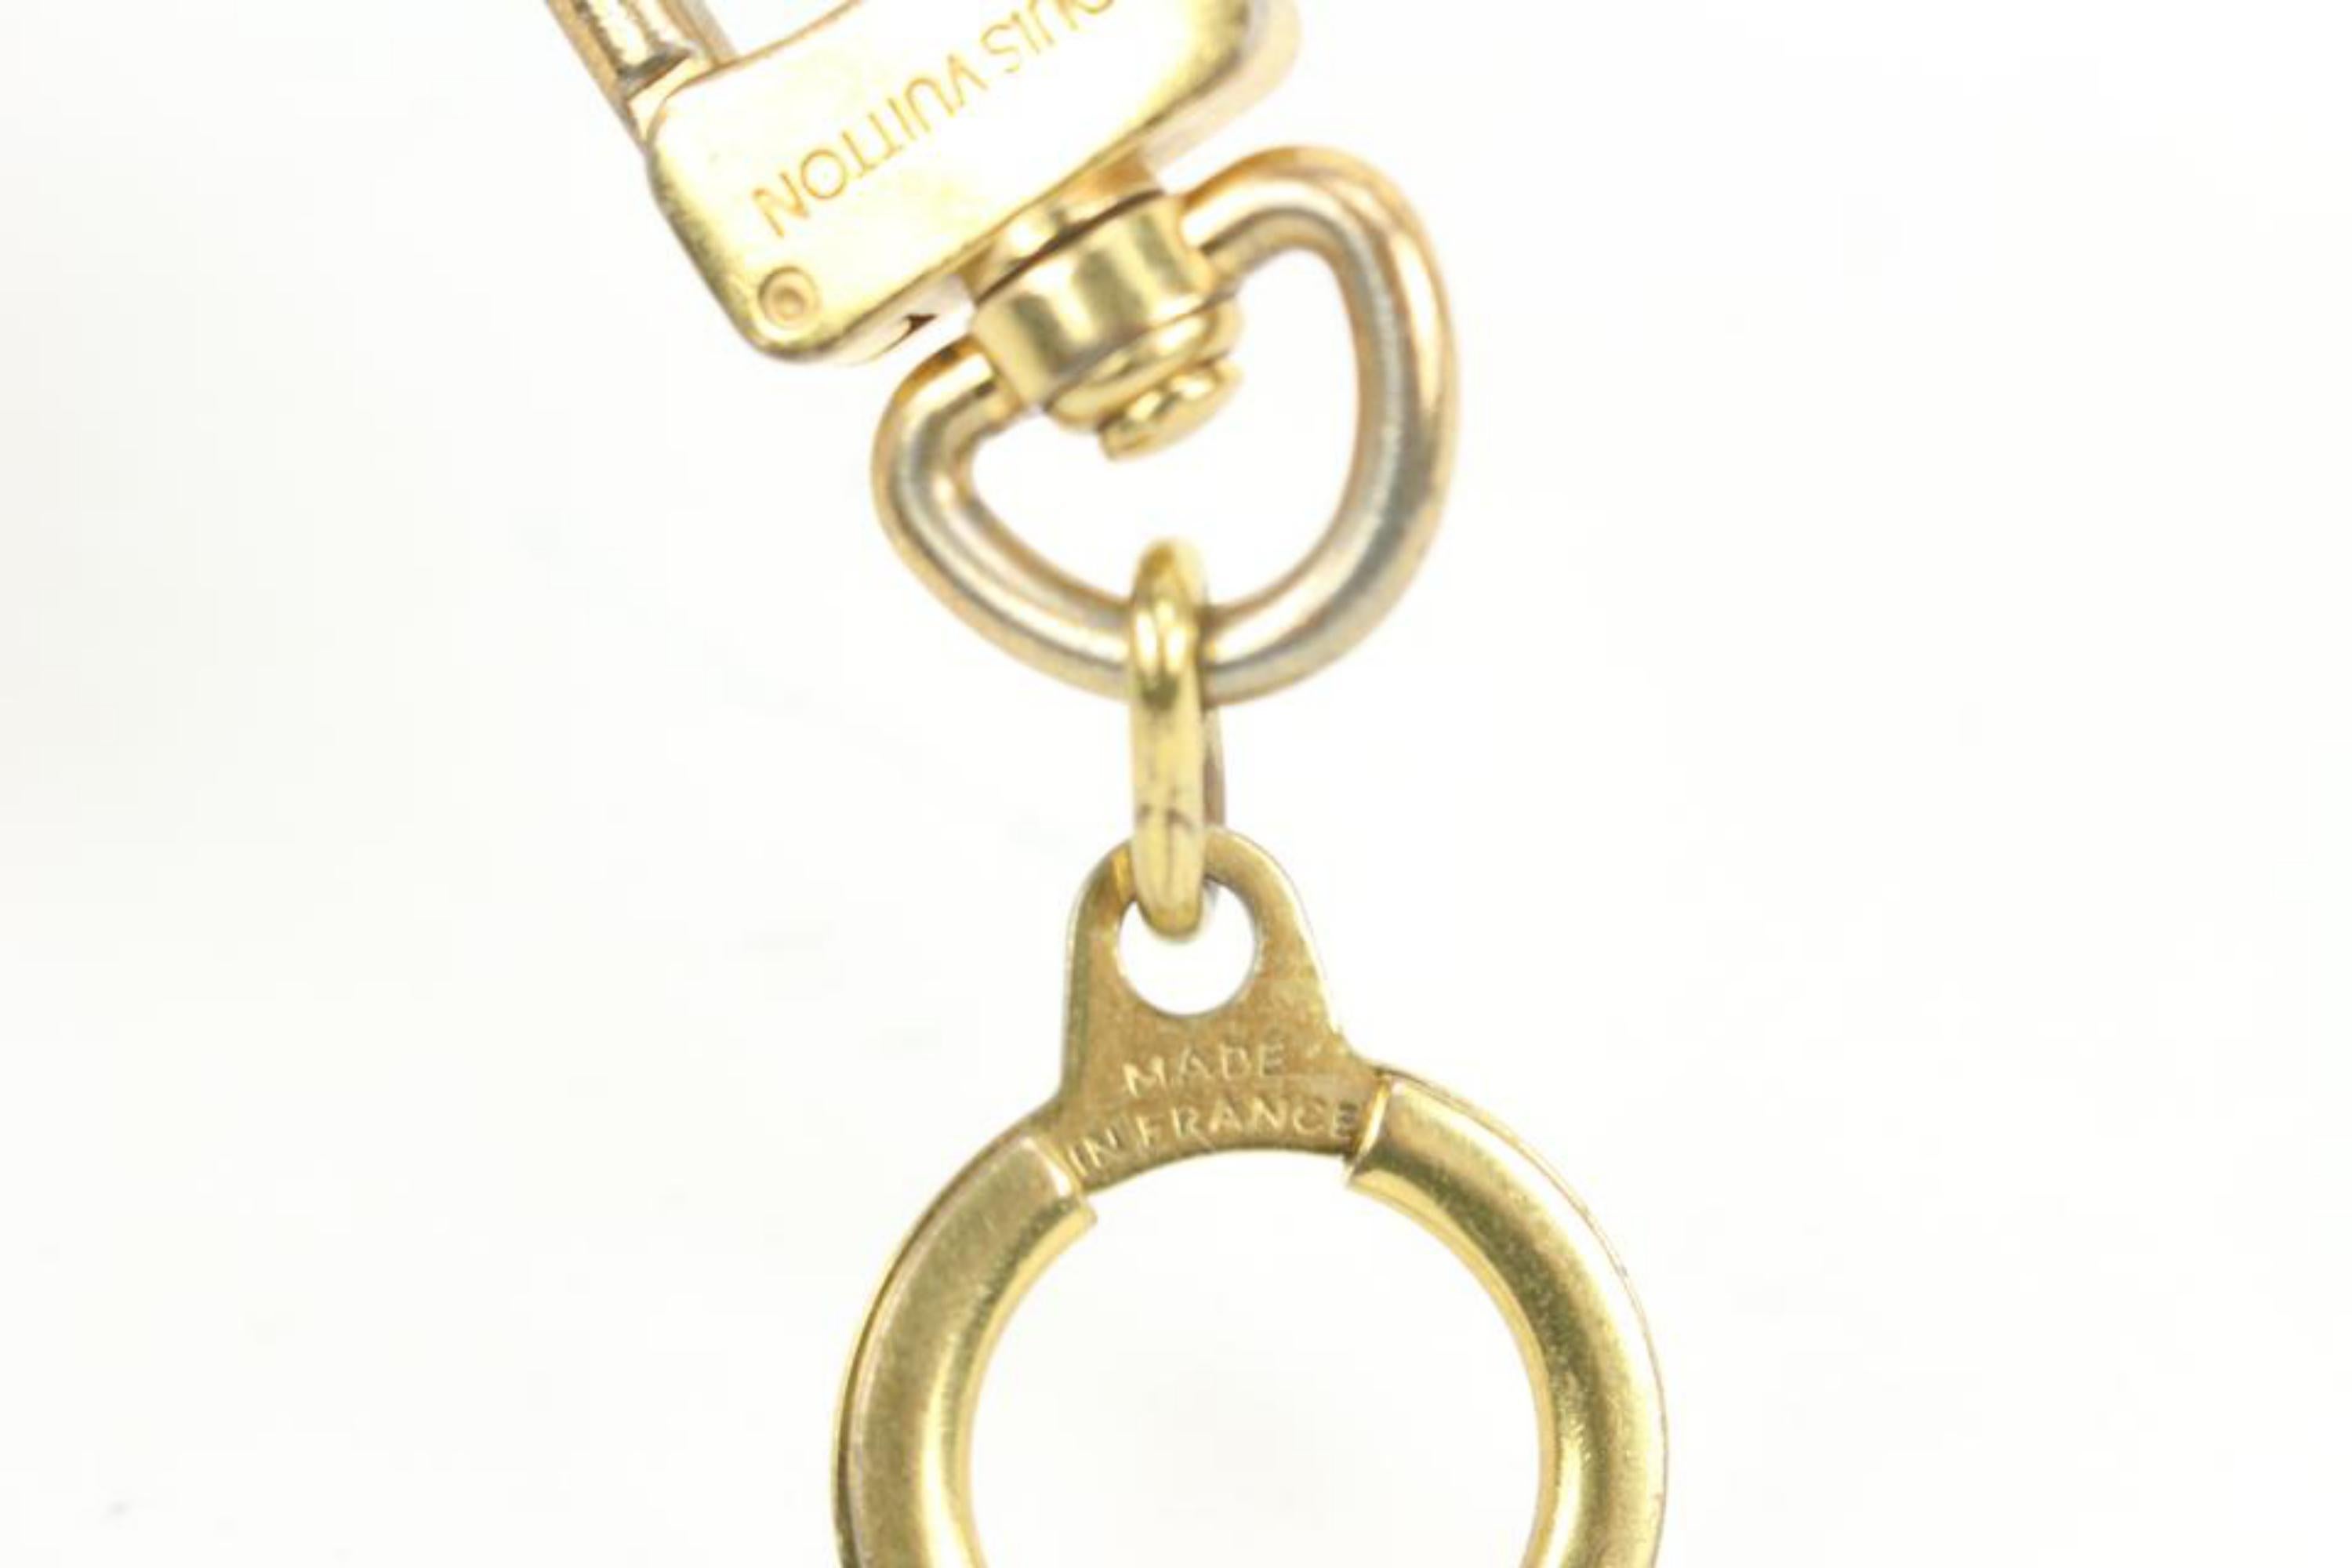 Louis Vuitton Pochette Extender Key Ring Gold 13lk426s In Fair Condition For Sale In Dix hills, NY